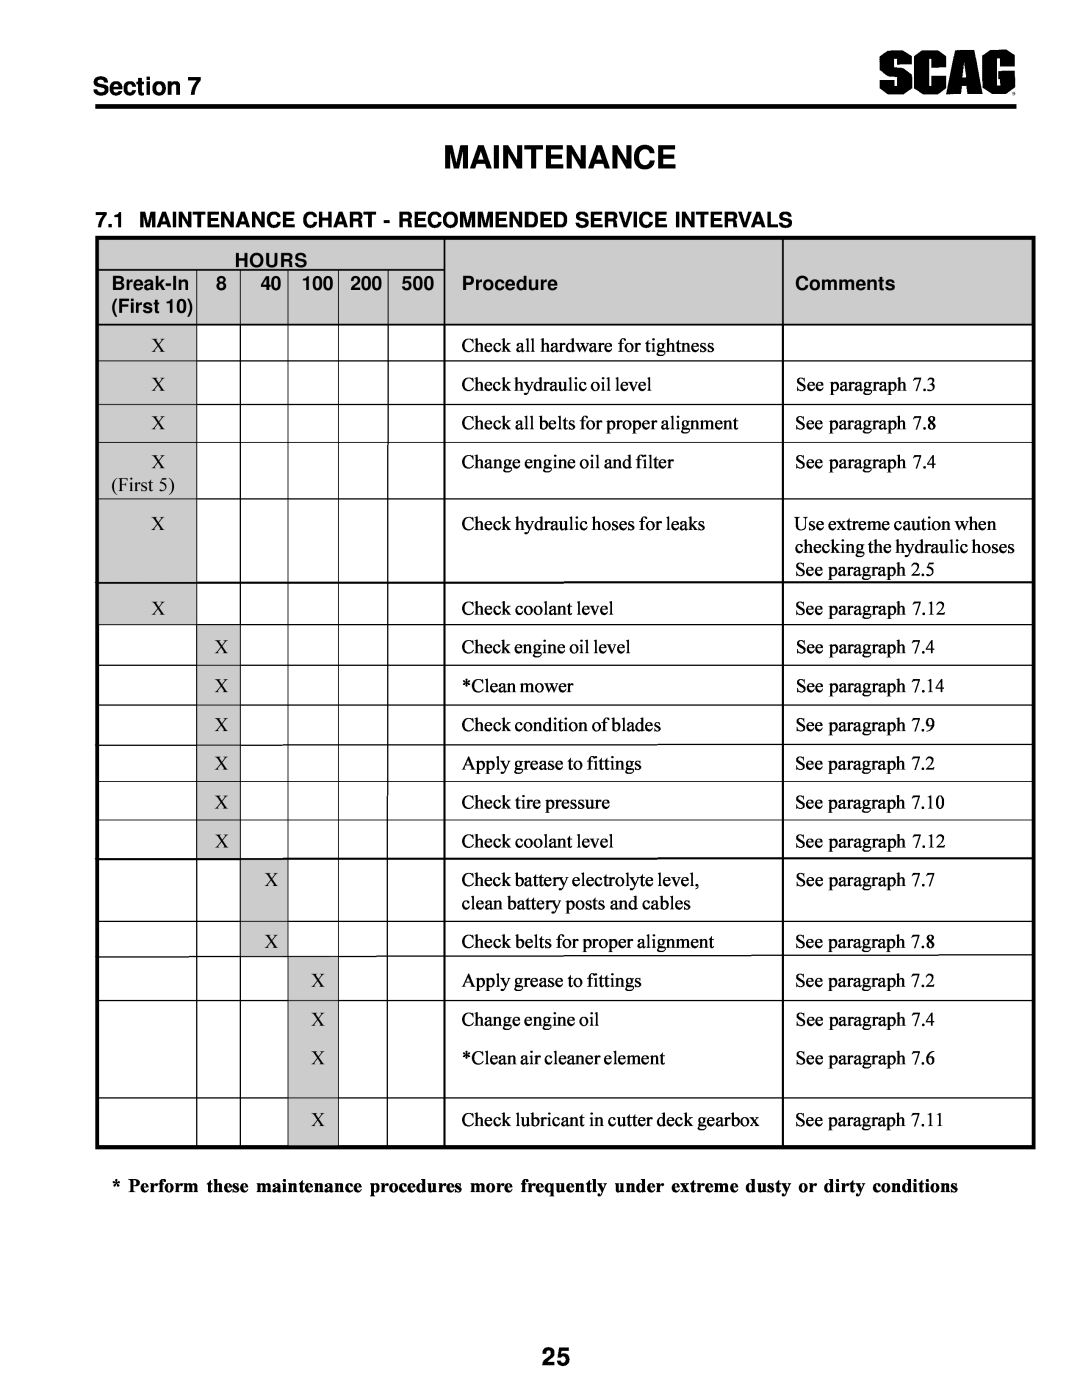 Scag Power Equipment STT-31BSG manual Maintenance Chart - Recommended Service Intervals, Section 